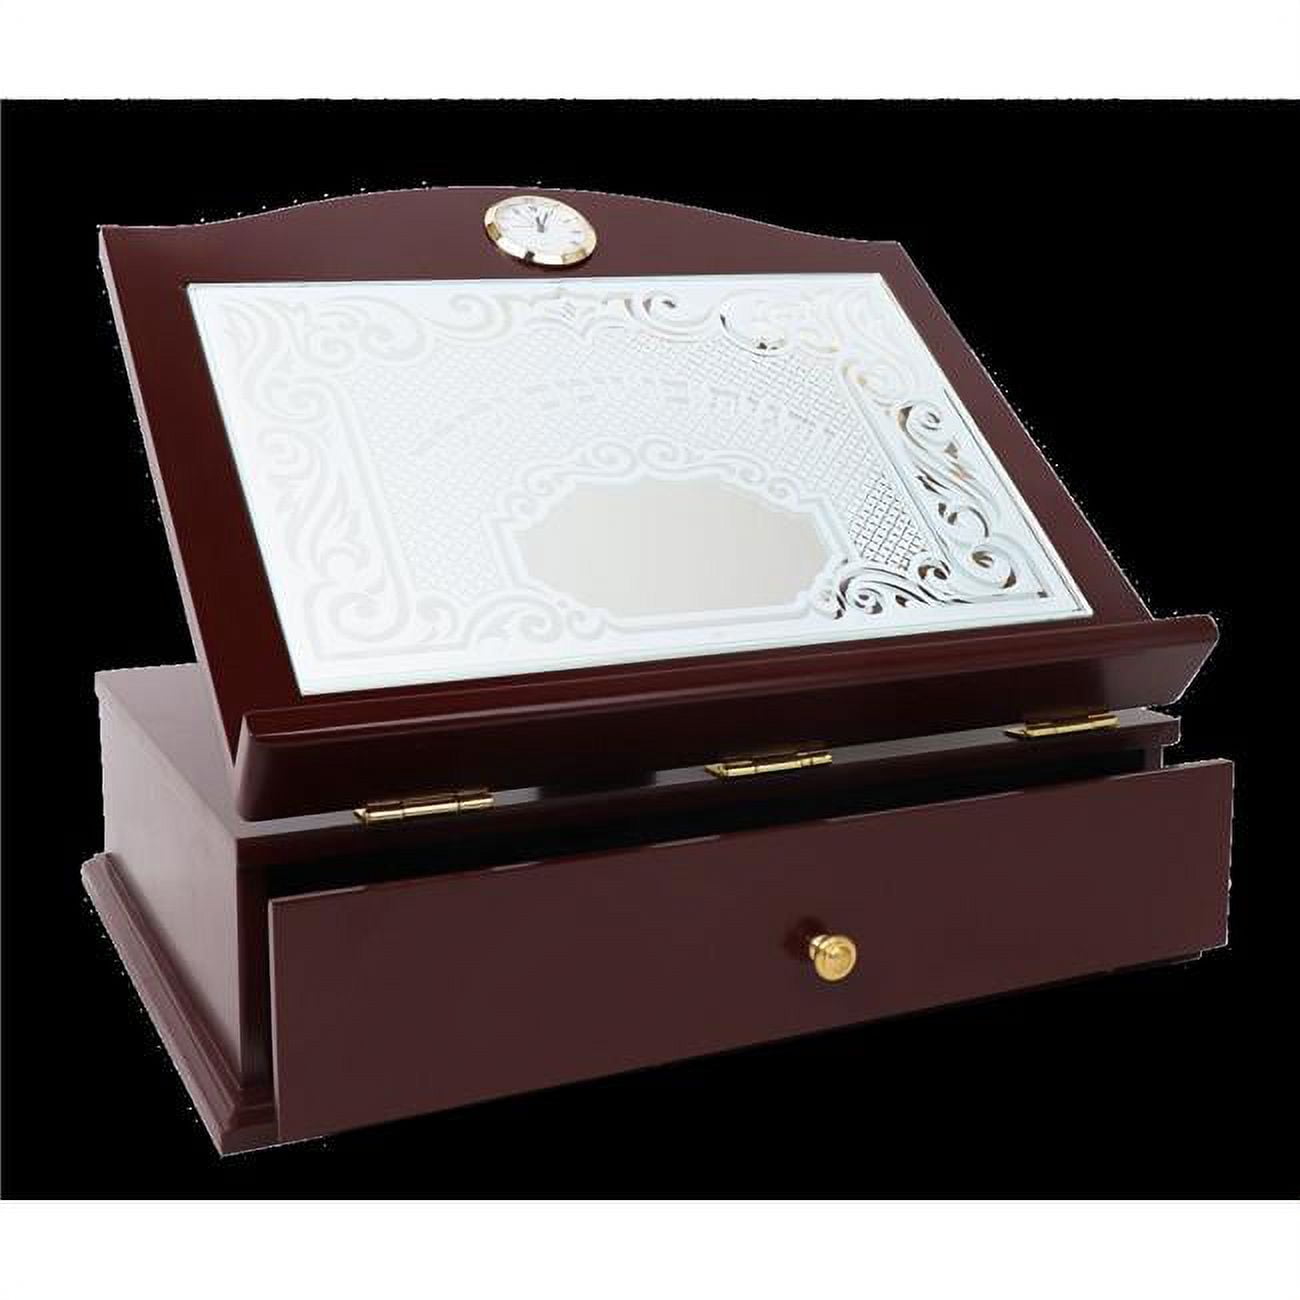 Picture of Nua 58378 14.5 x 12 x 5.5 in. Mahogany Table Shtender with Mirror Designed Top & Drawer with Gold Clock